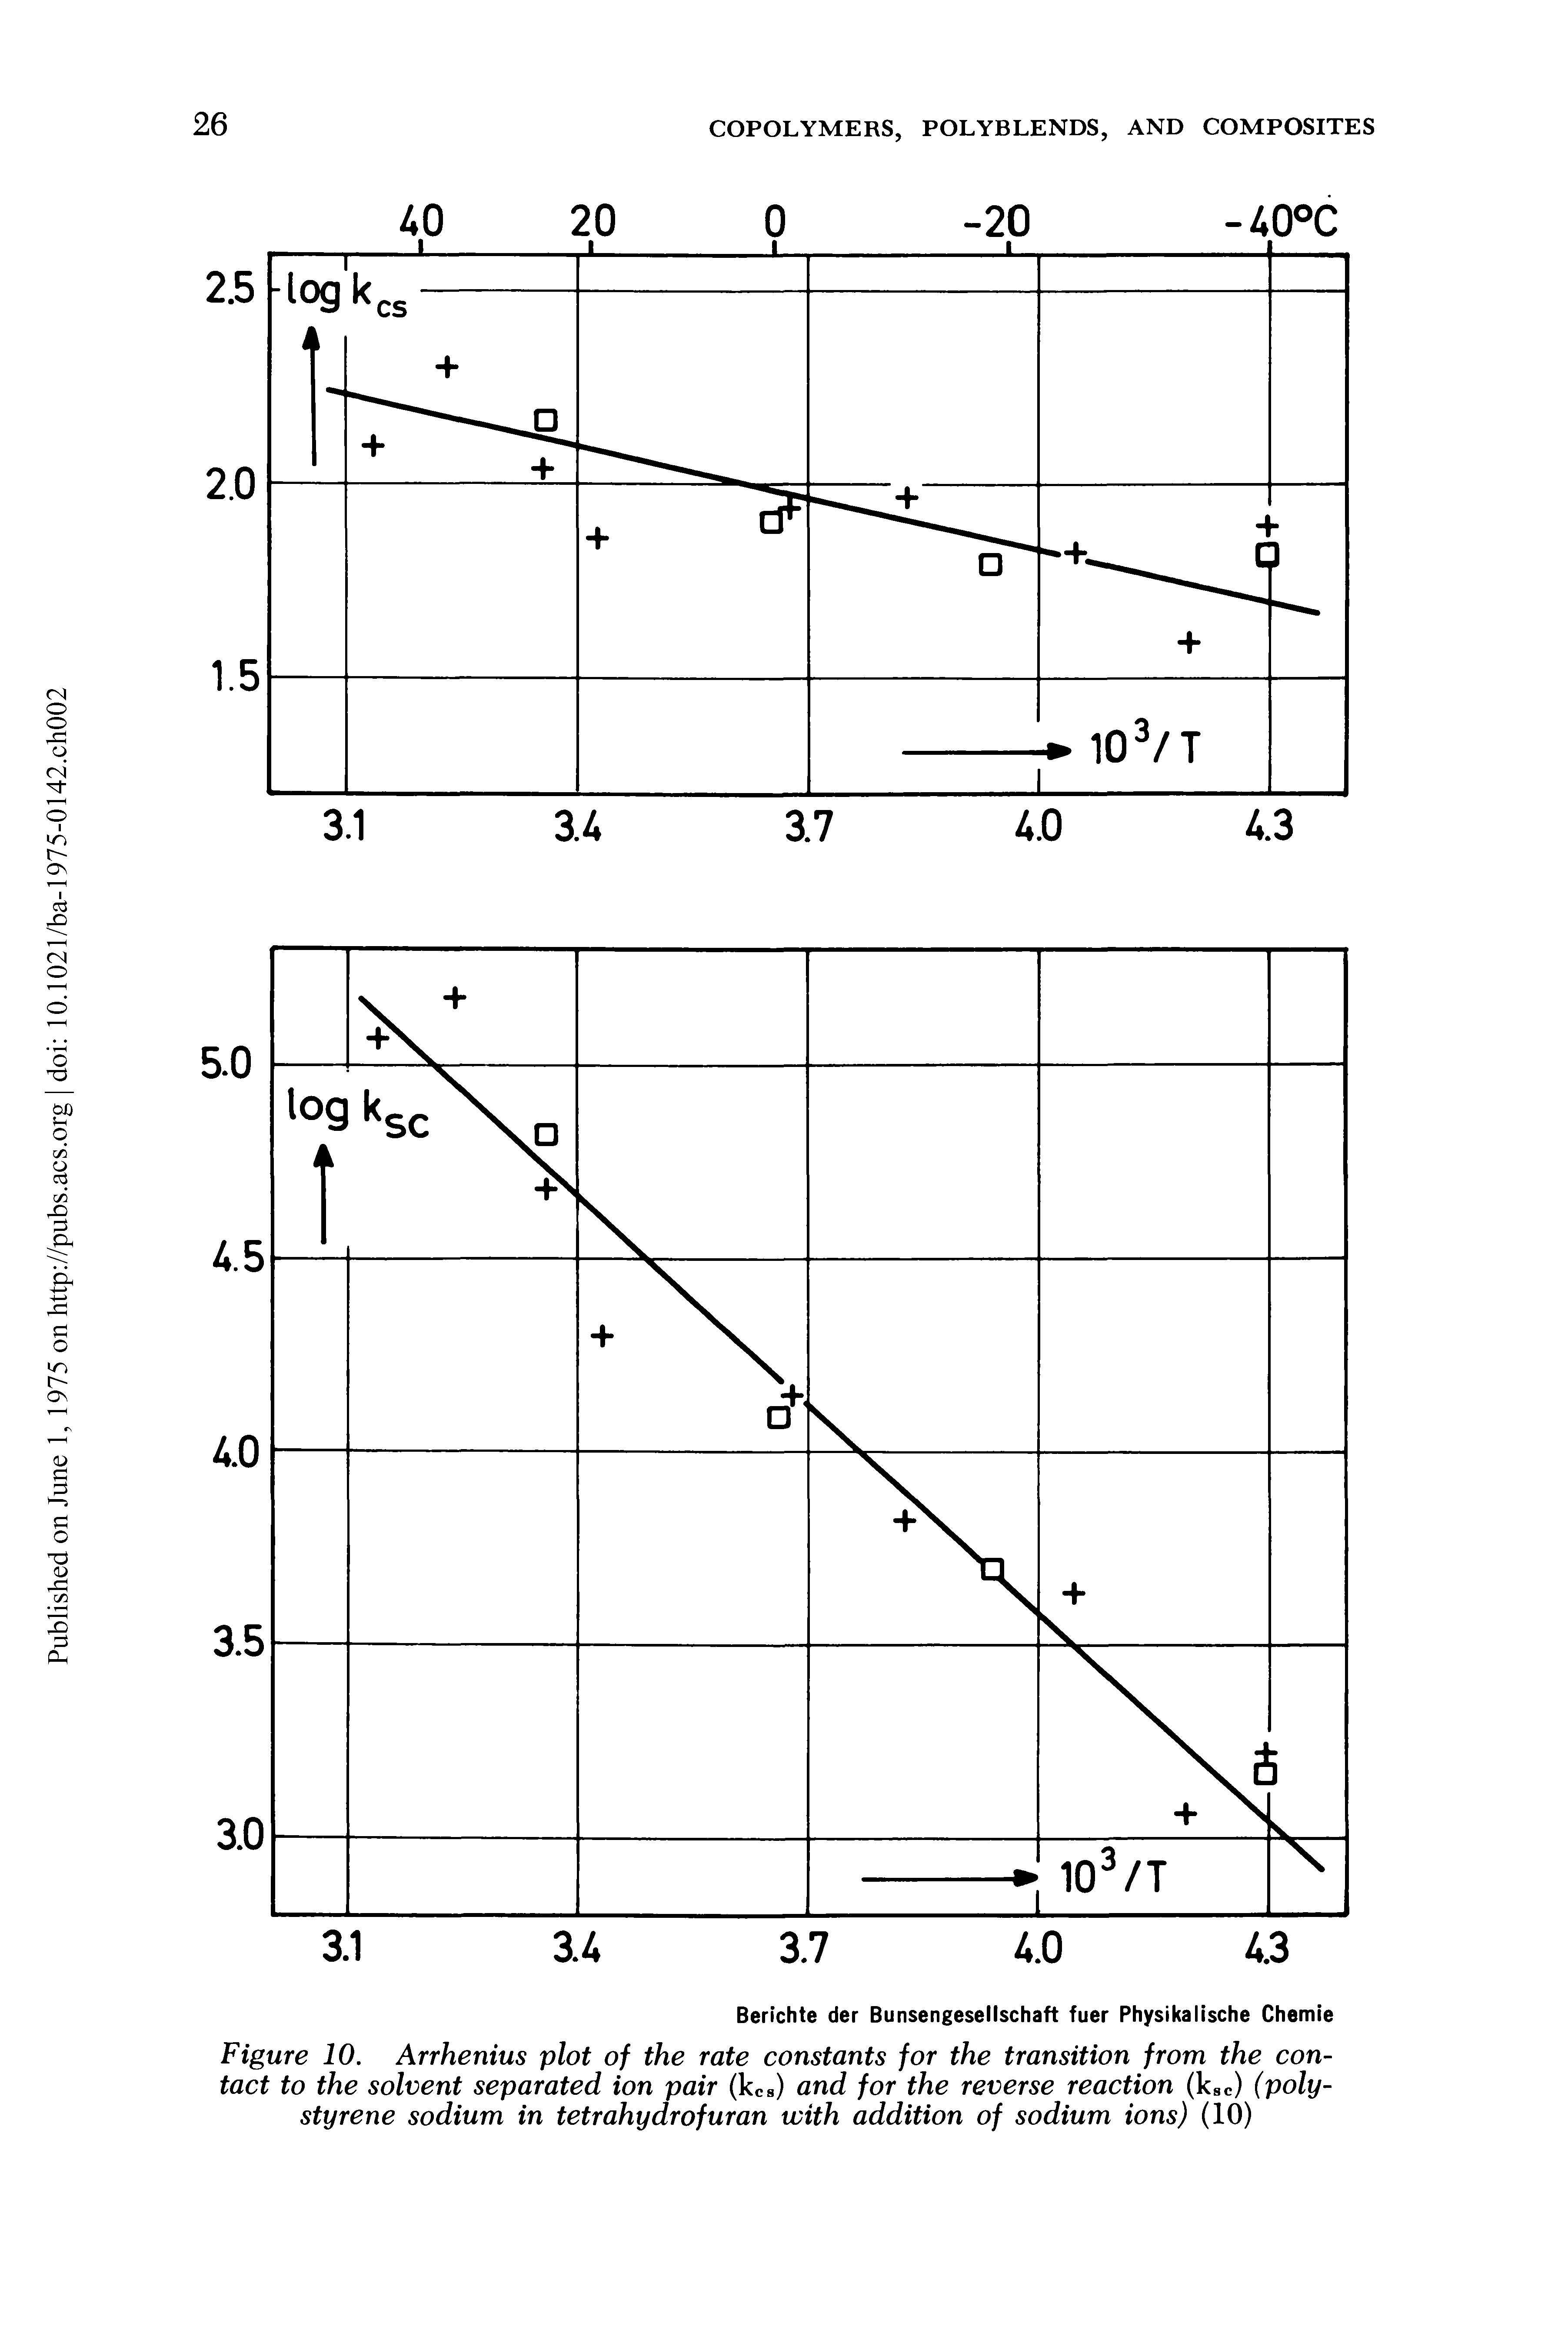 Figure 10. Arrhenius plot of the rate constants for the transition from the contact to the solvent separated ion pair (kC8) and for the reverse reaction (k8C) (polystyrene sodium in tetrahydrofuran with addition of sodium ions) (10)...